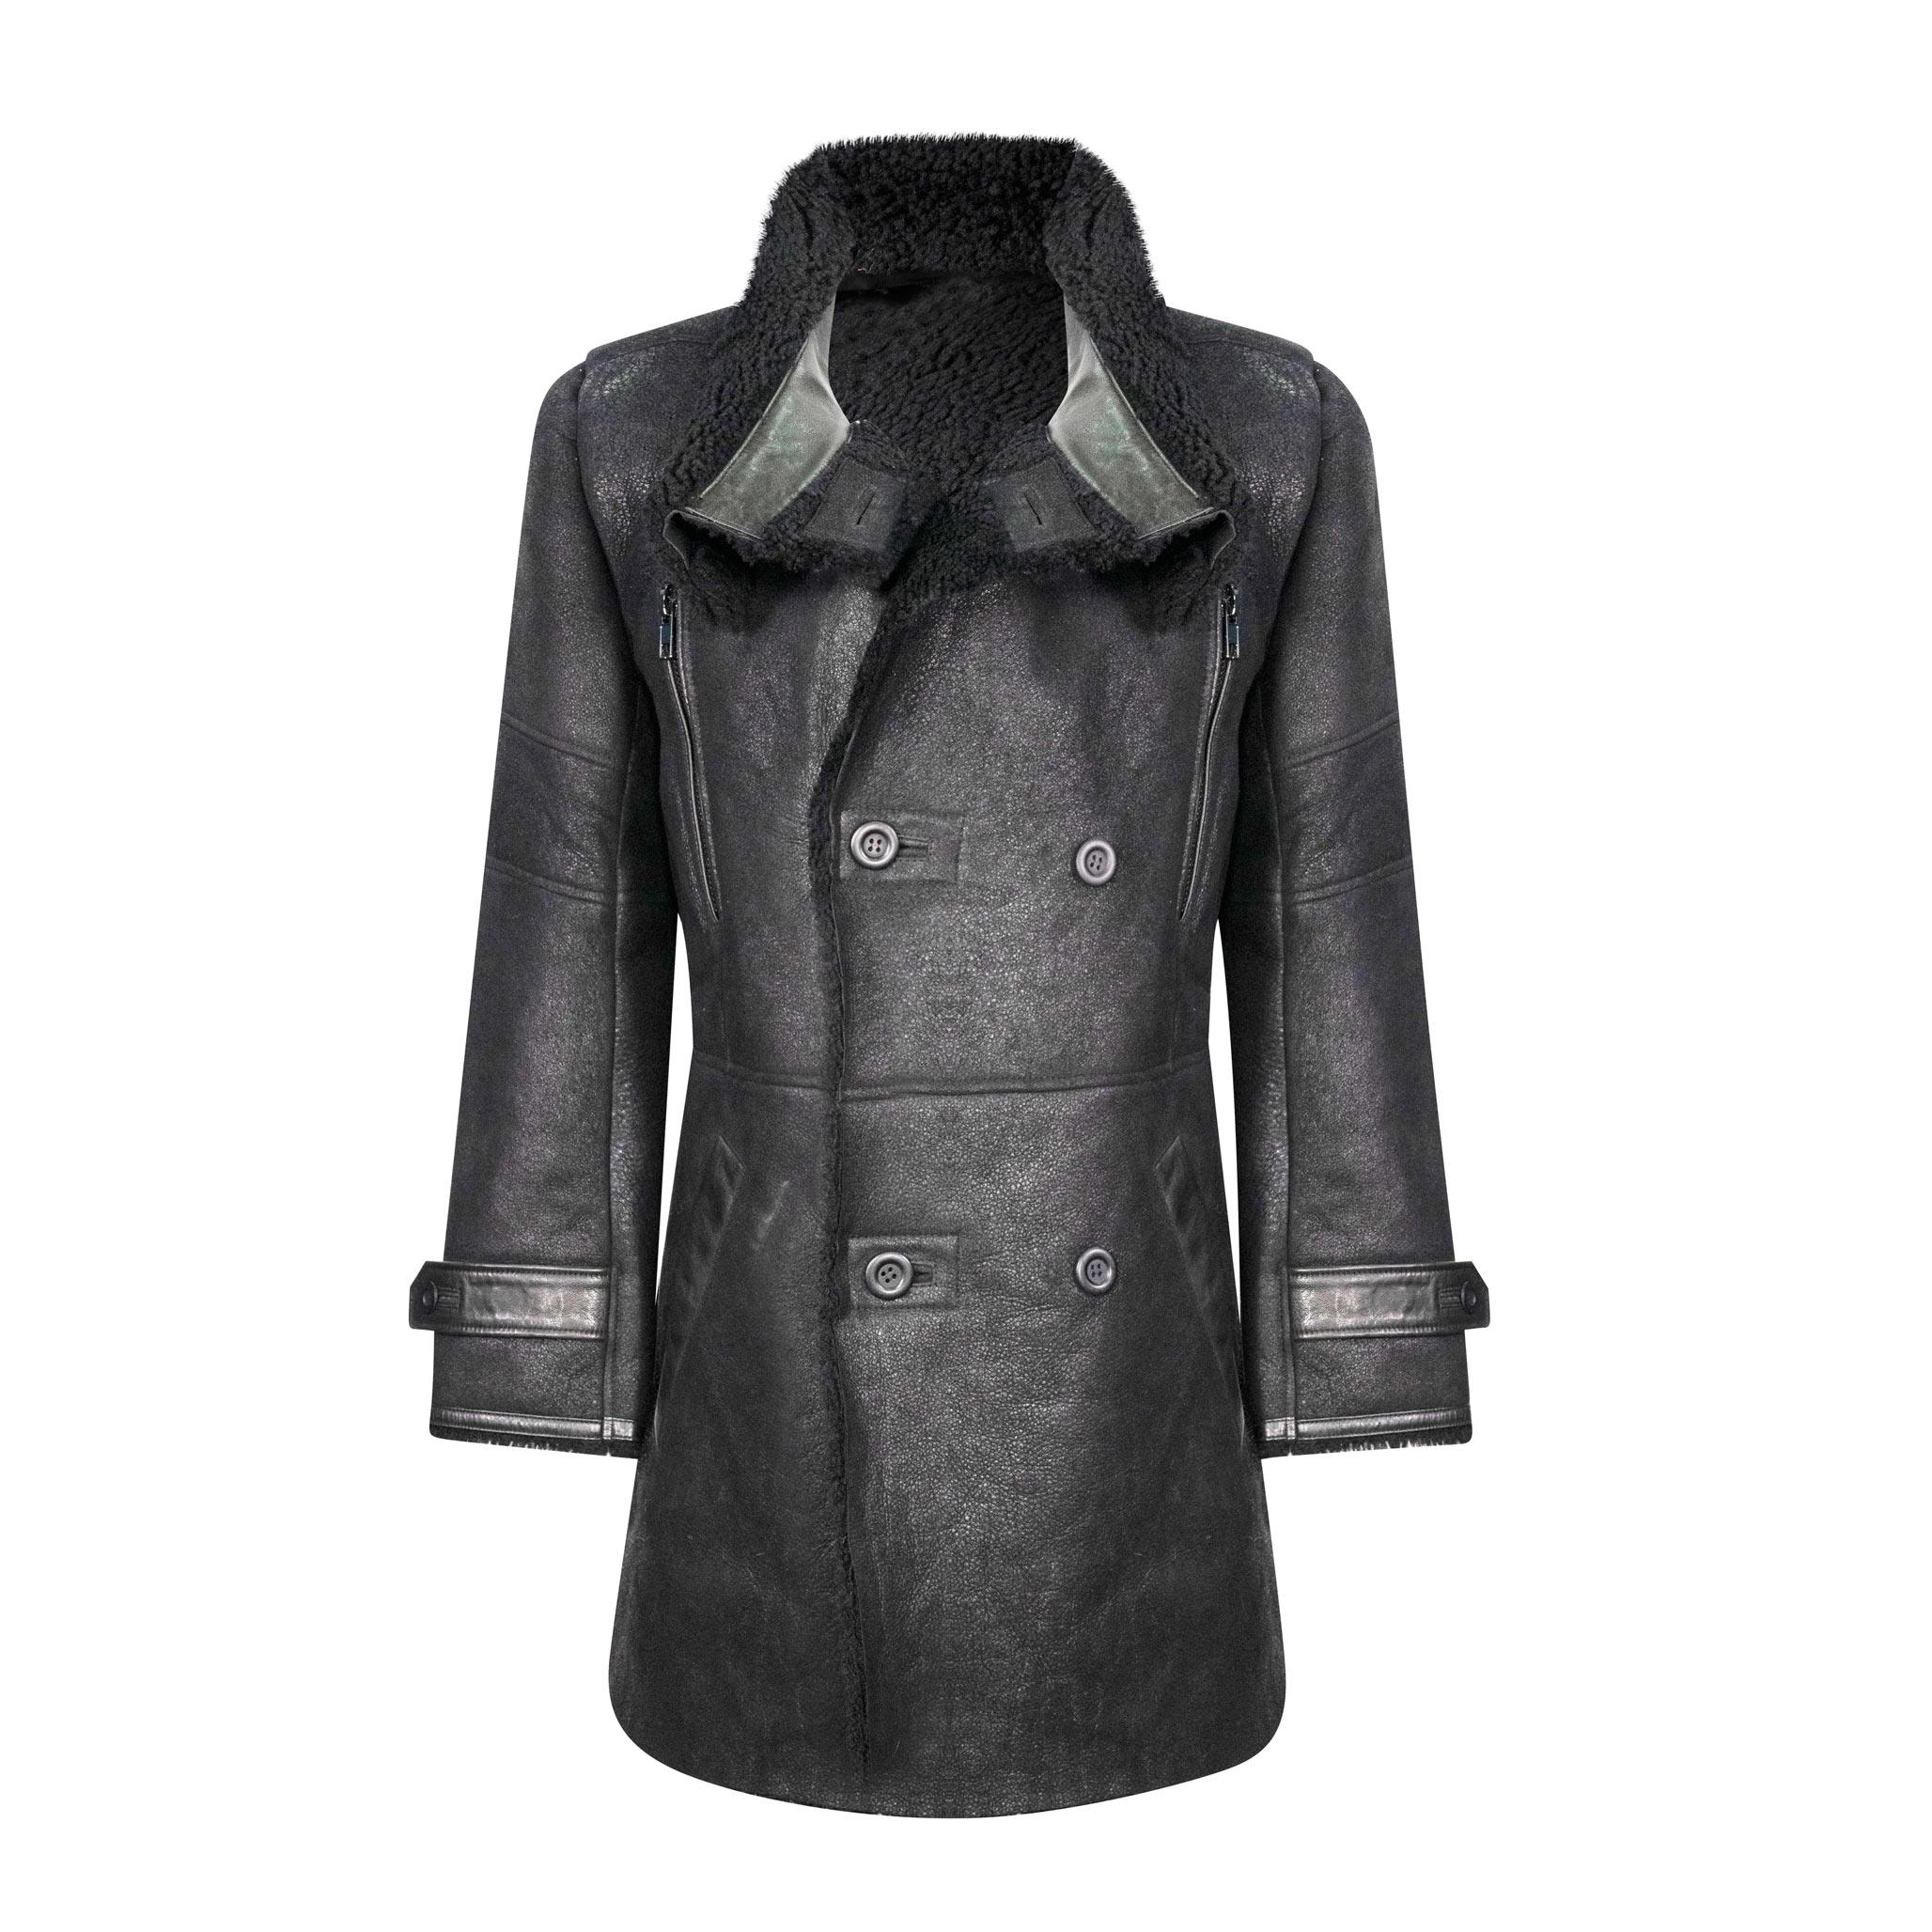 A beautful mens sheepskin coat in black. Buttoned double breasted front closure. 3/4 length. Zipped chest pockets, and unzipped side pockets. Black inner fur.